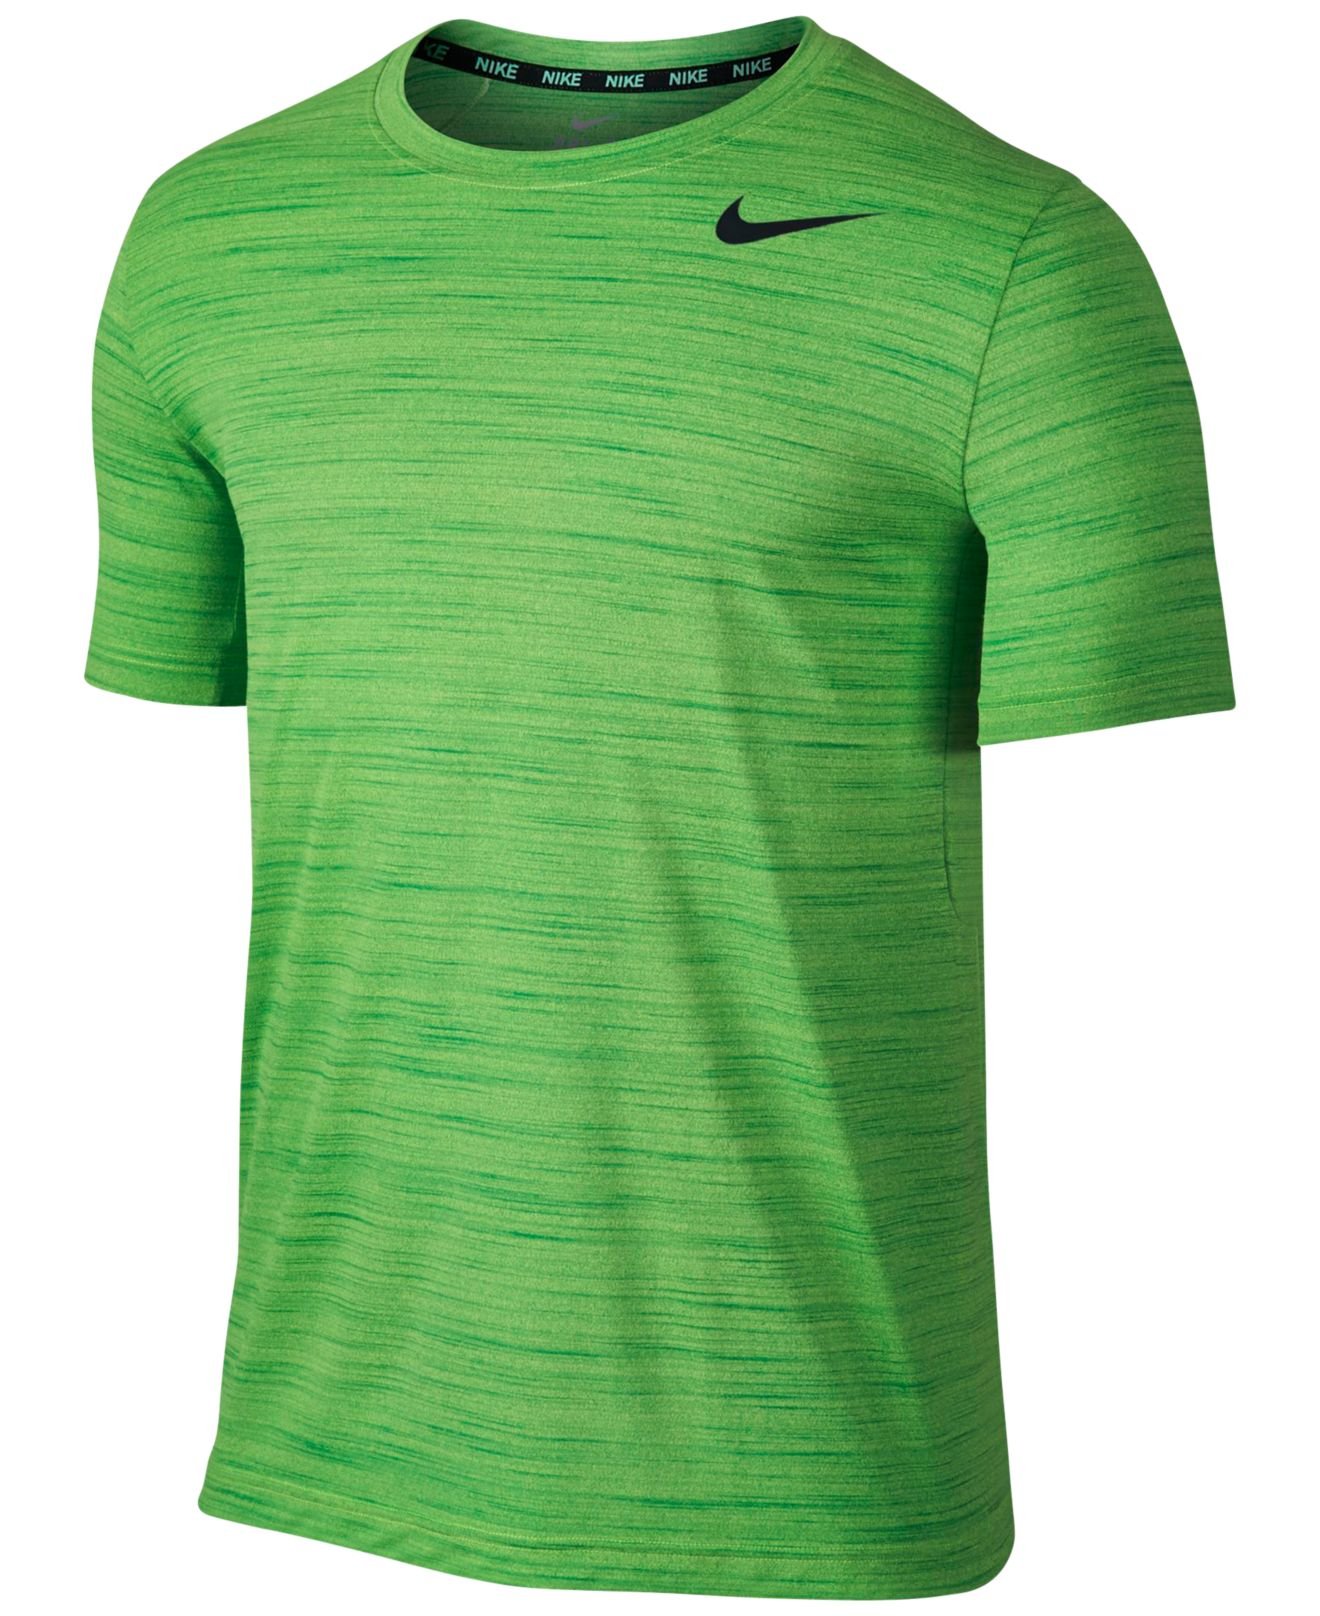 Nike Men's Dri-fit Touch Heather T-shirt in Green for Men - Lyst